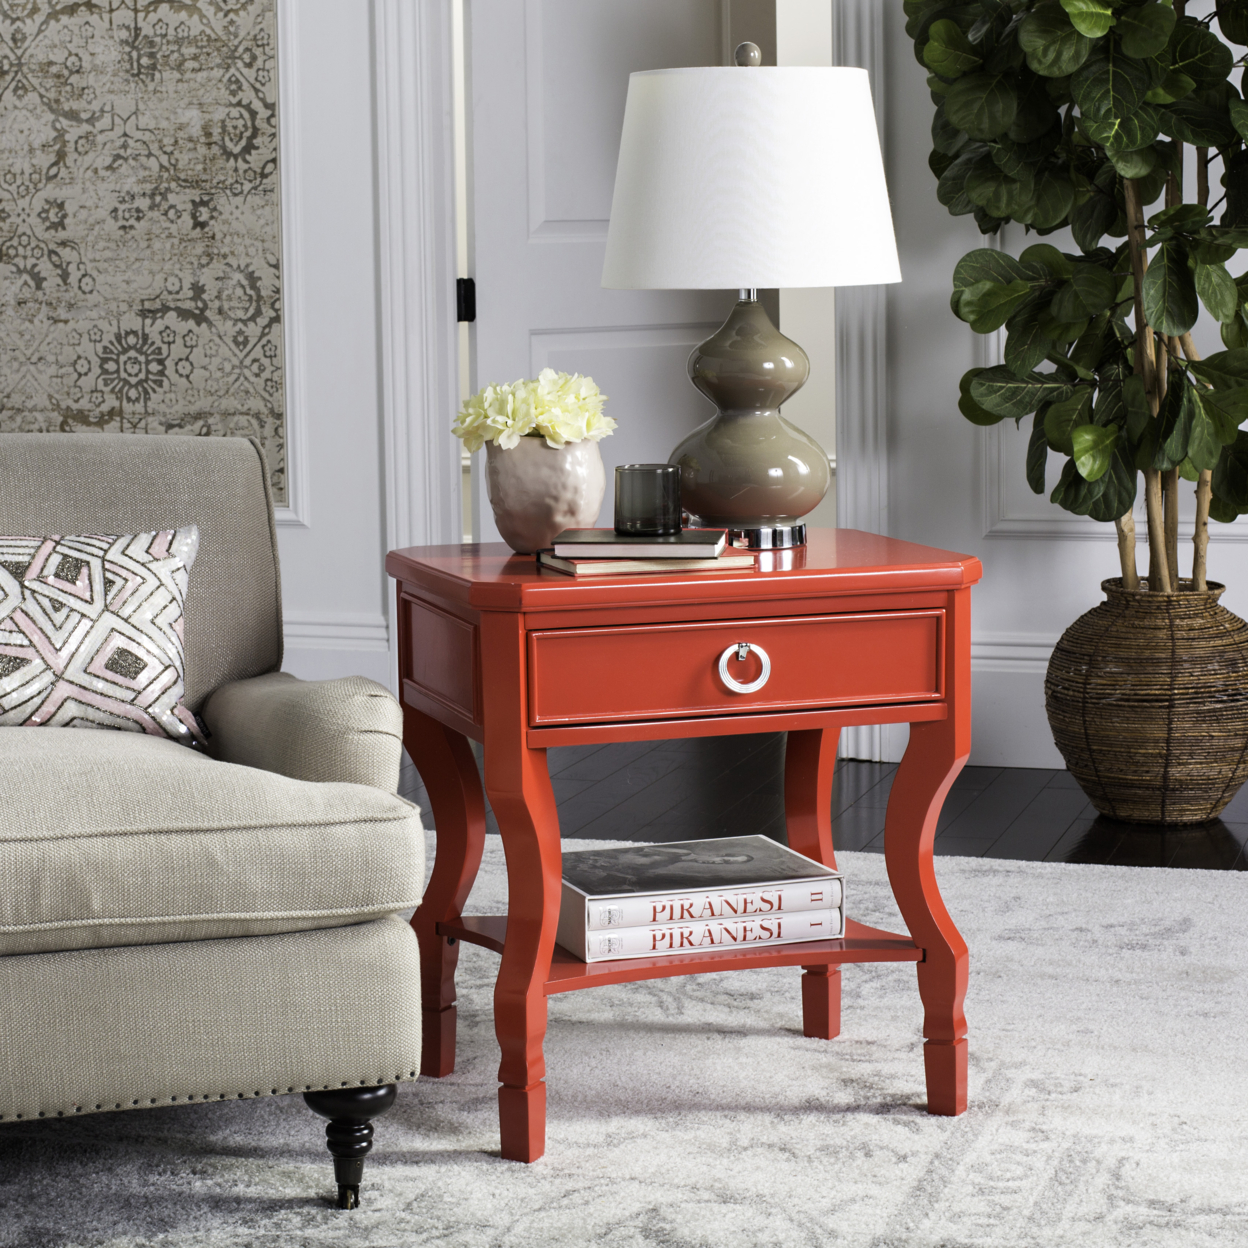 SAFAVIEH Alaia One Drawer Night Stand Red